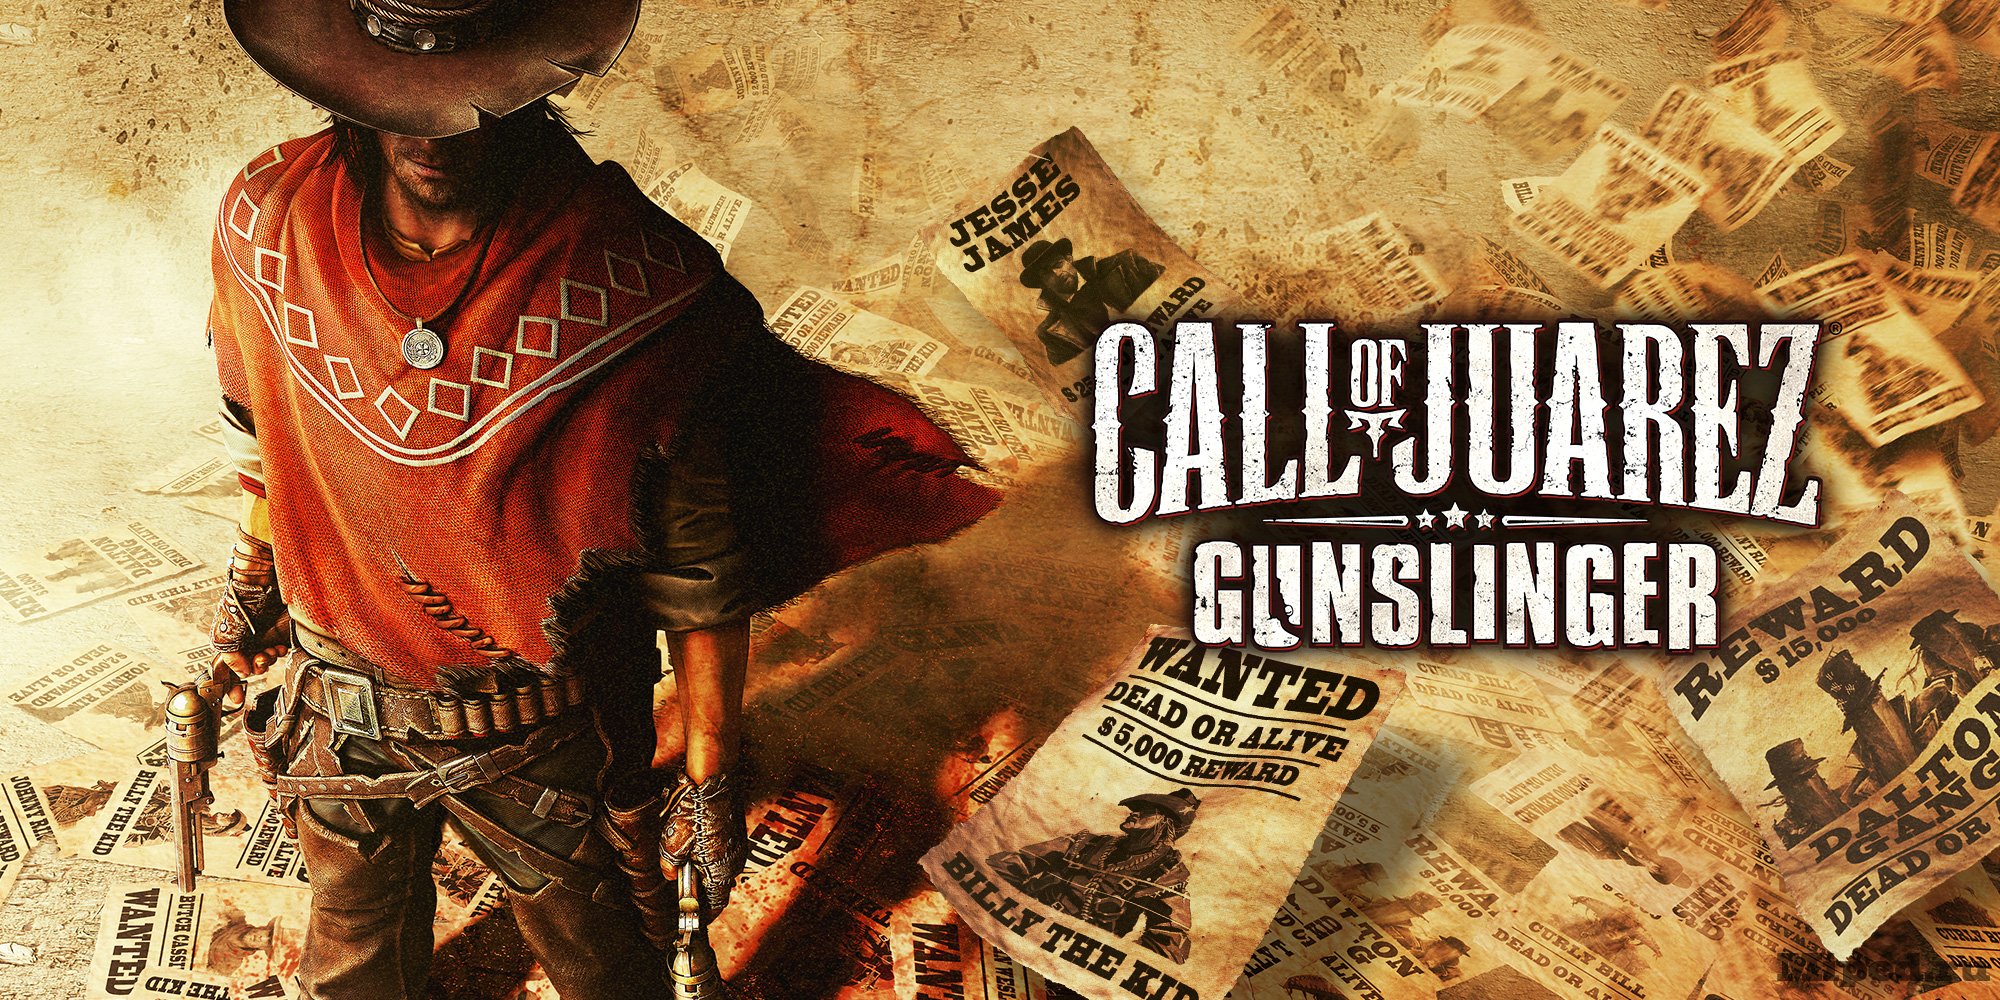 Gunslinger steam is required фото 7